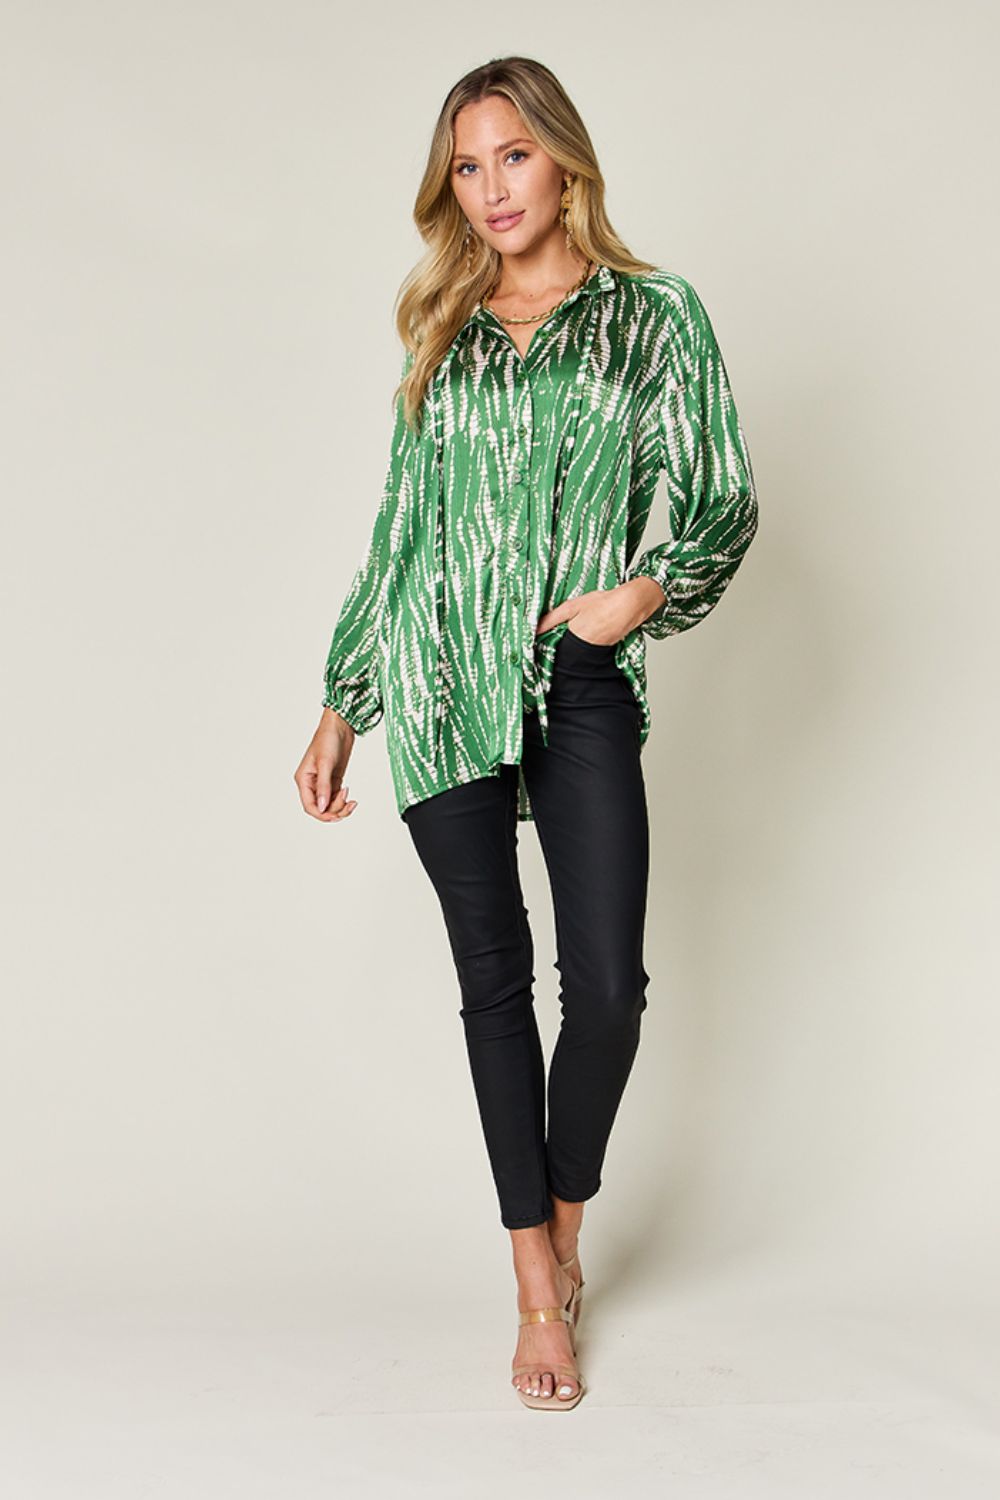 Double Take Full Size Printed Button Up Long Sleeve Shirt